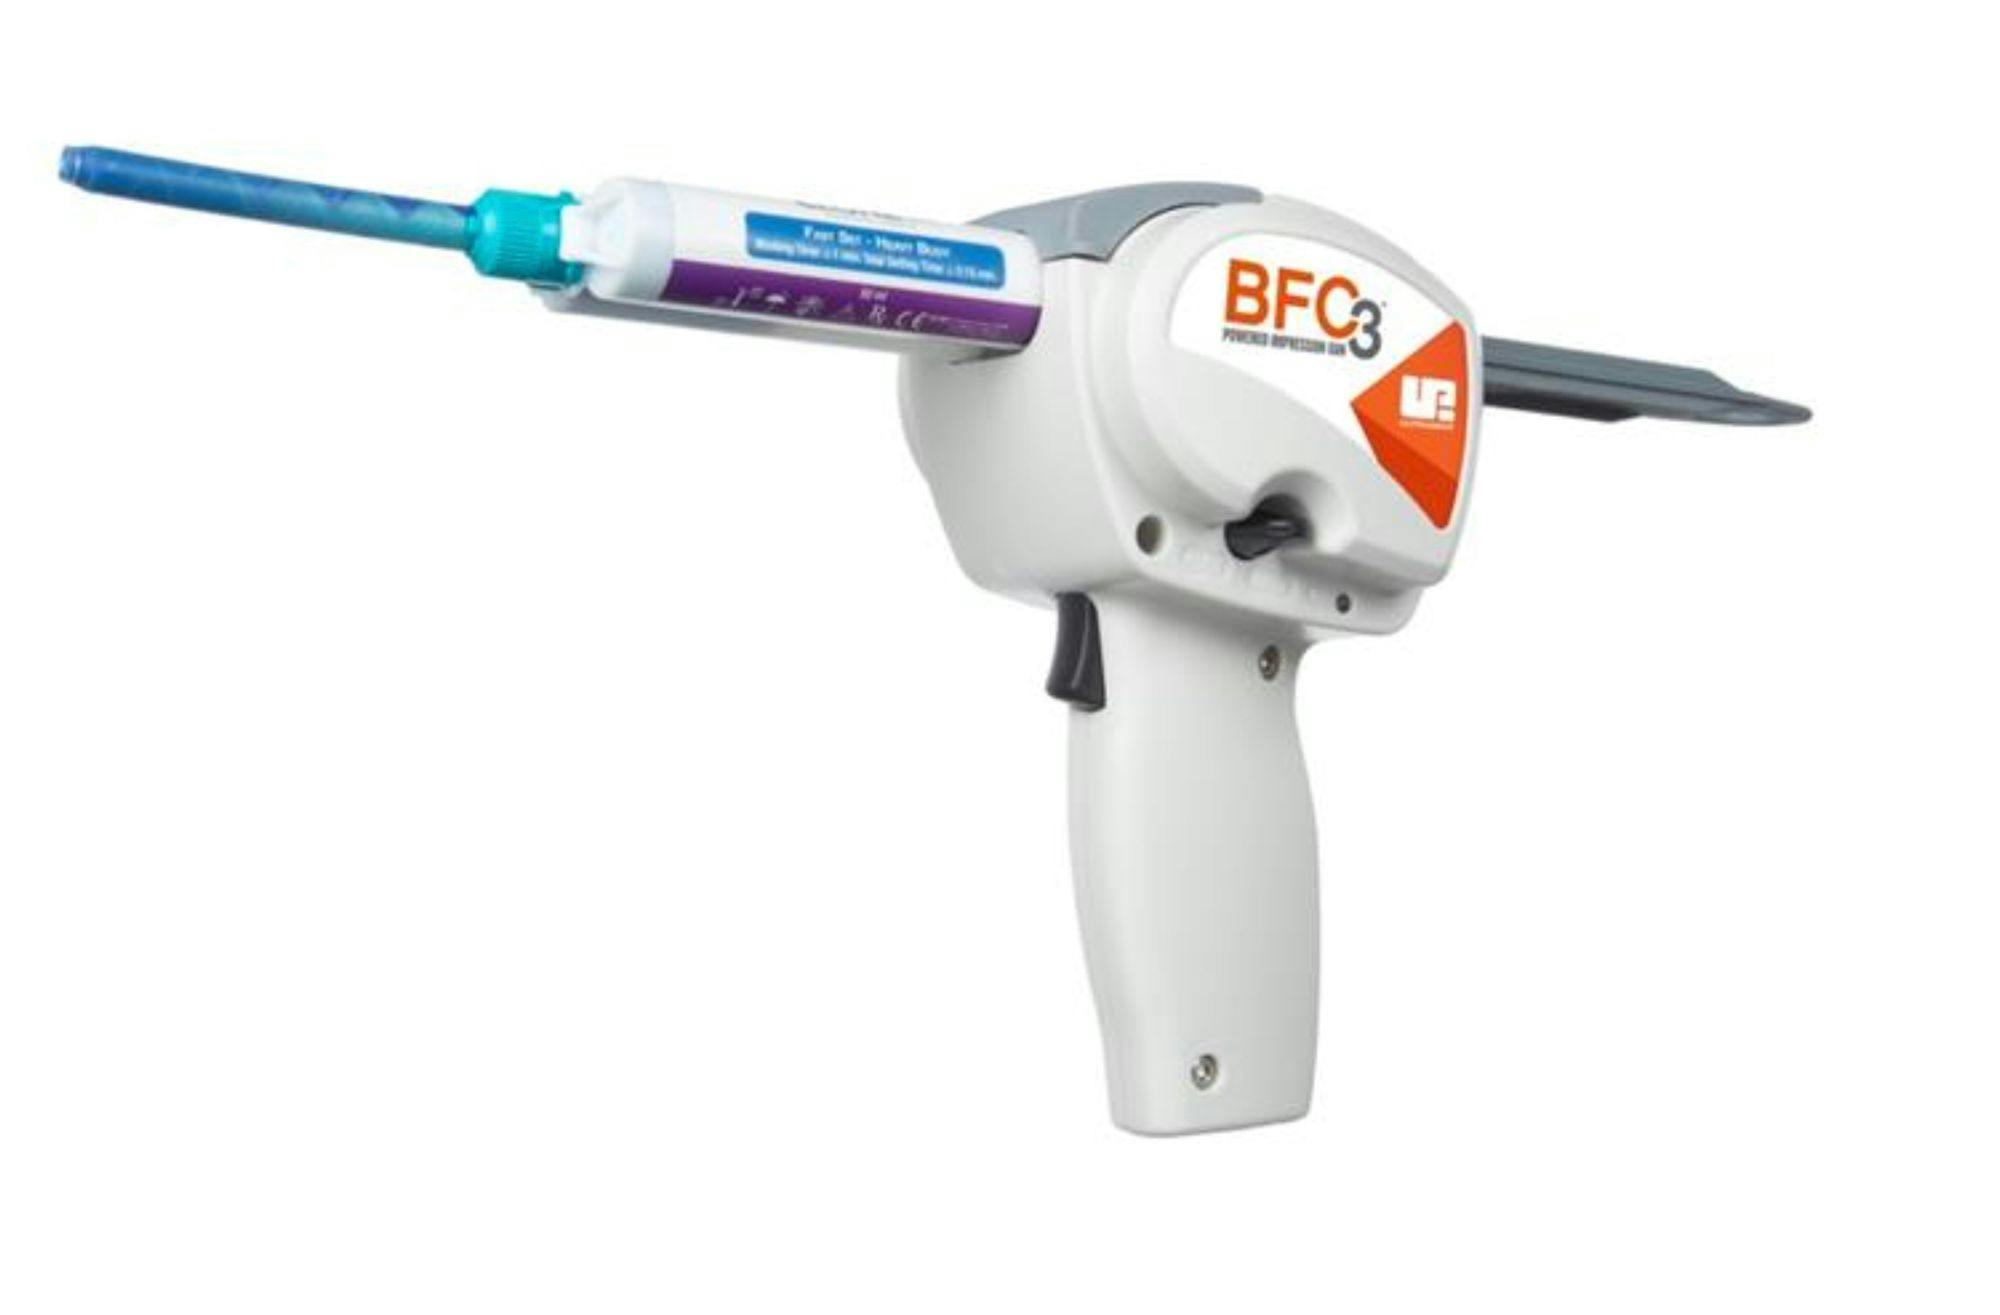 The BFC3 Impression Gun from Ultradent. Image: © Ultradent Products, Inc. 